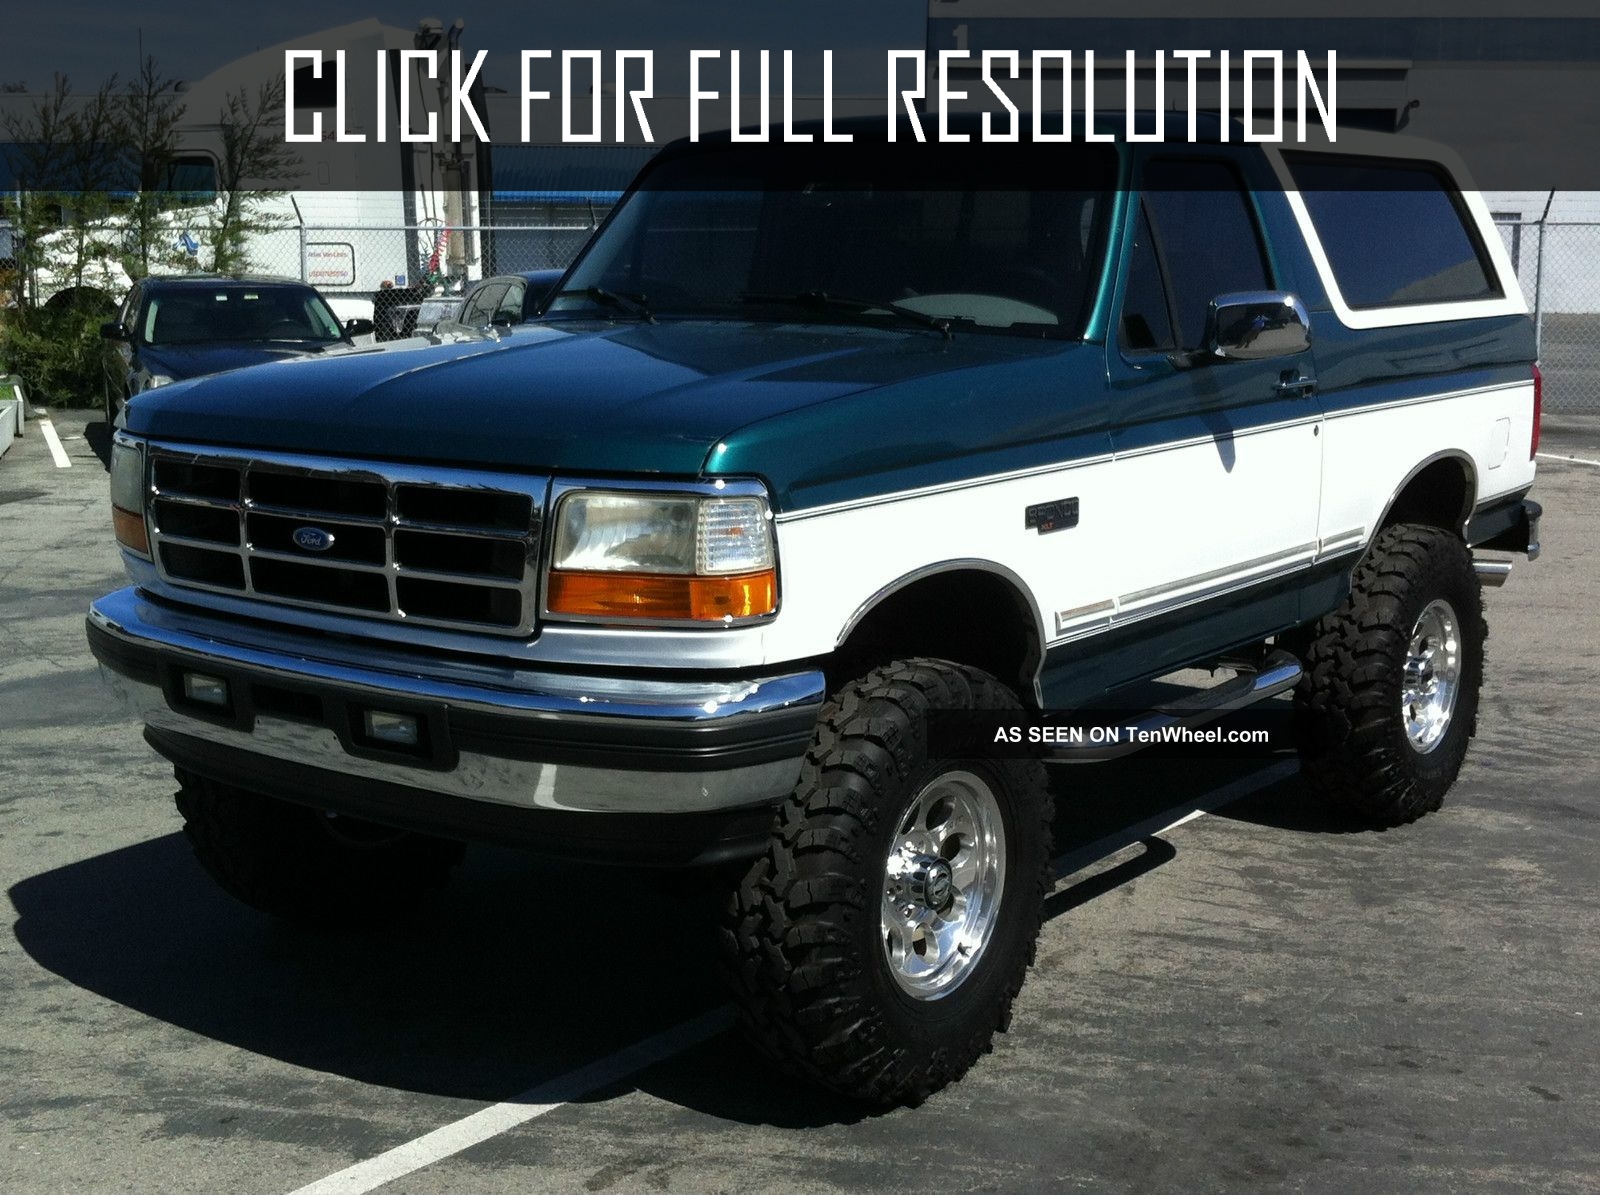 Ford Bronco 5.0